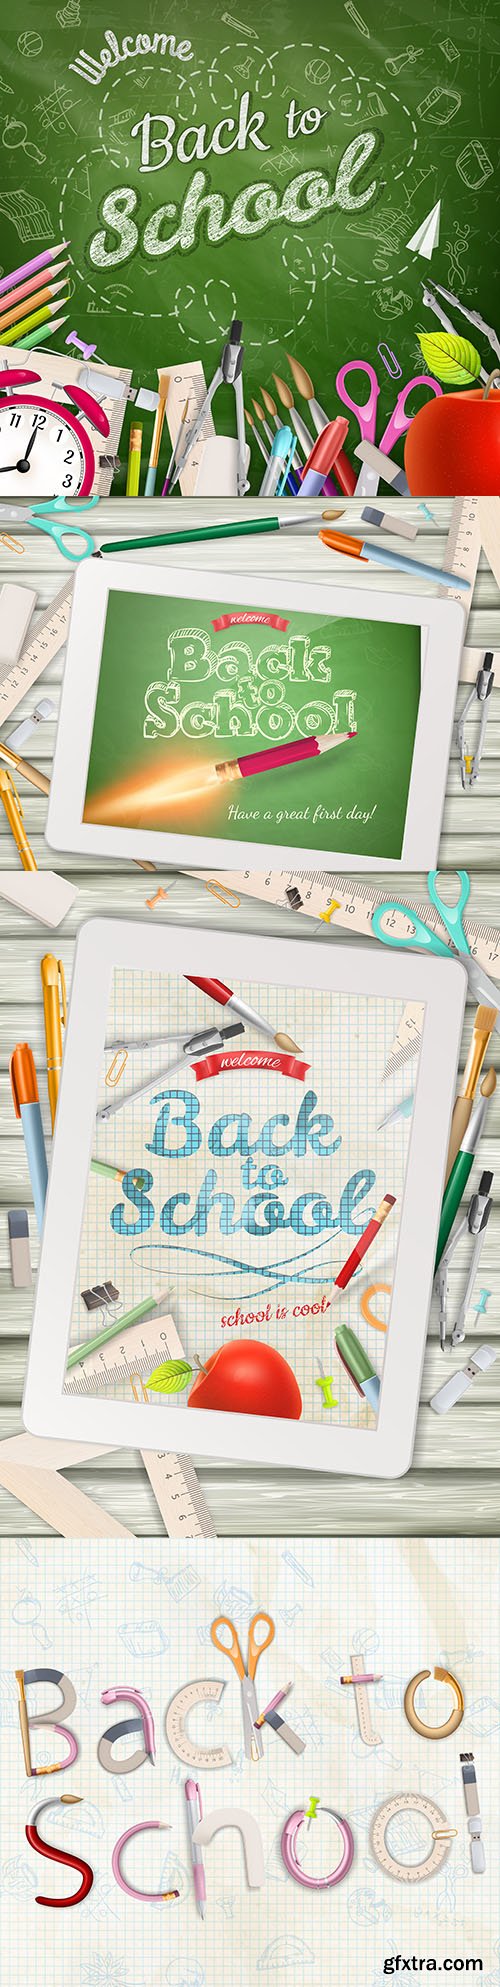 Back to school and accessories collection illustration 42
